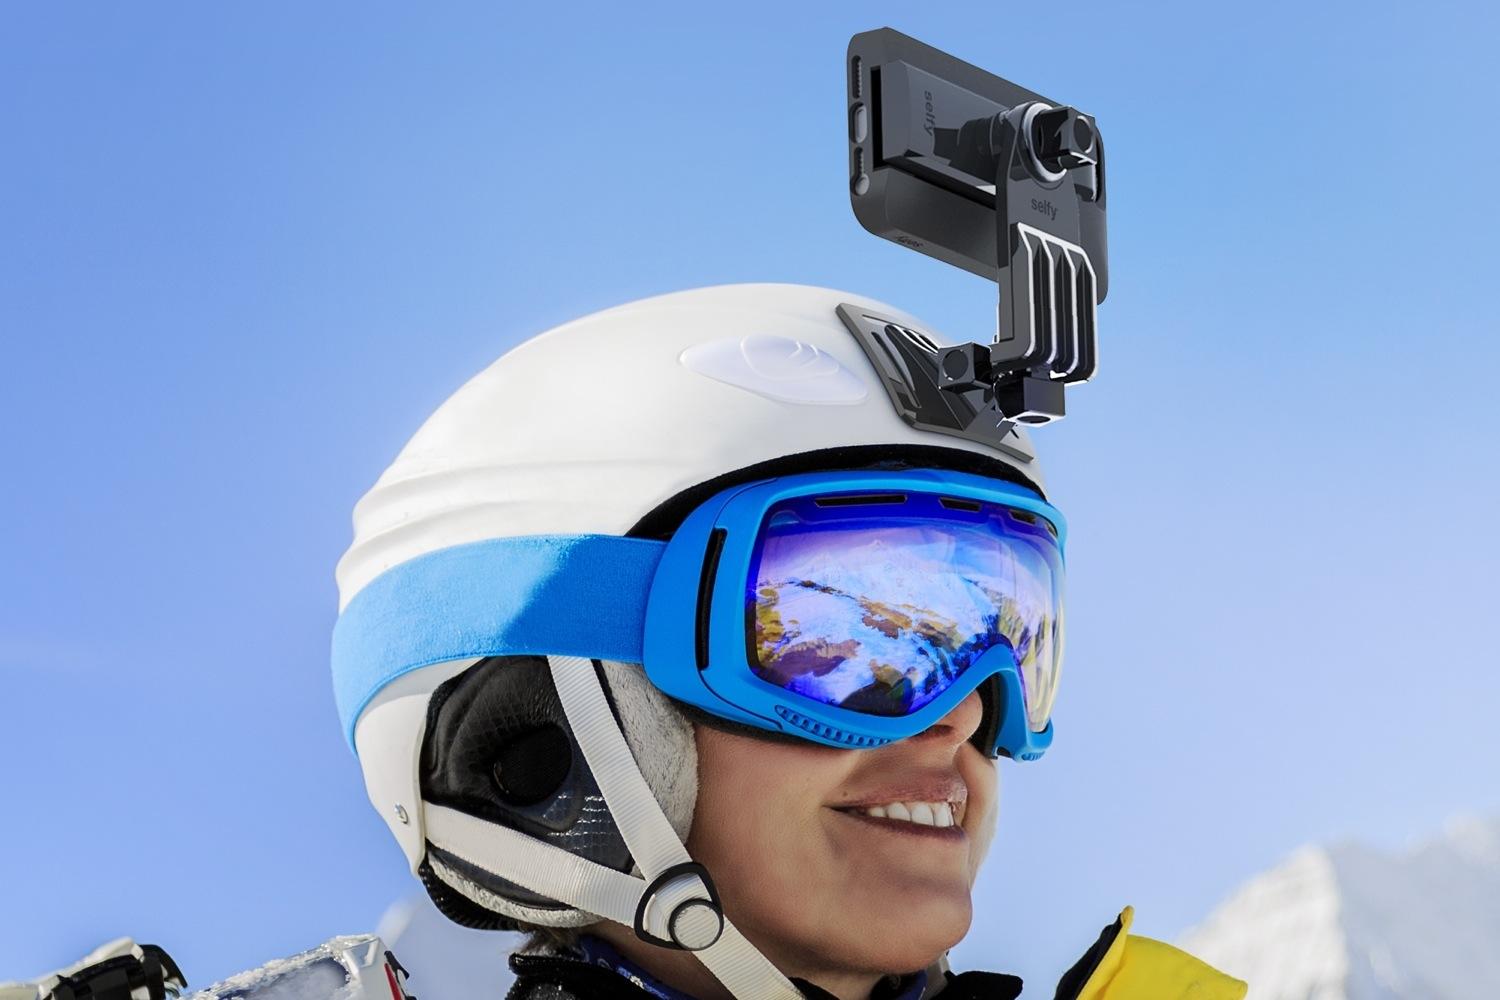 iluv smartphone case with built in remote shutter designed for the selfie obsessed selfy helmet